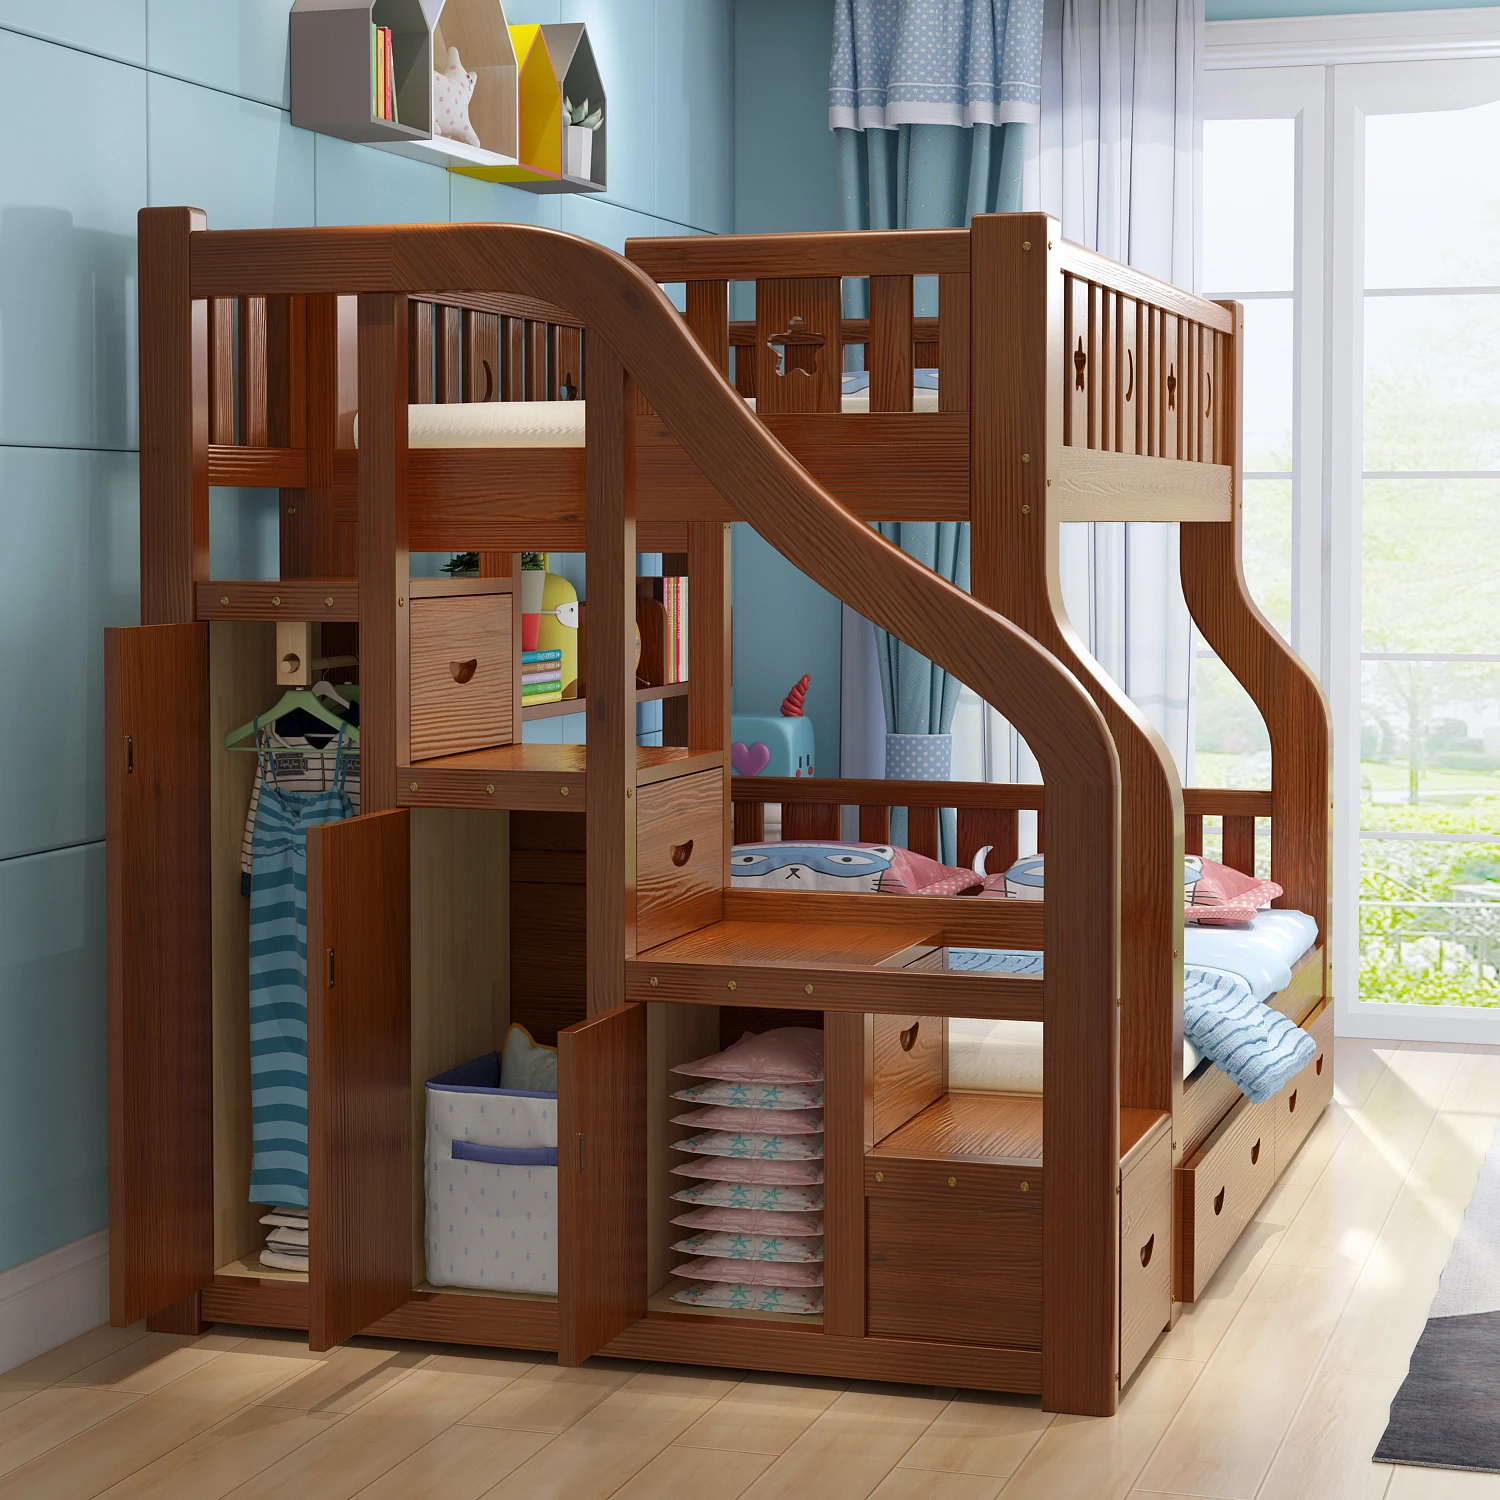 Hot Sale Multifunction Furniture Big Size Beds Wood Bunk Bed With Storage